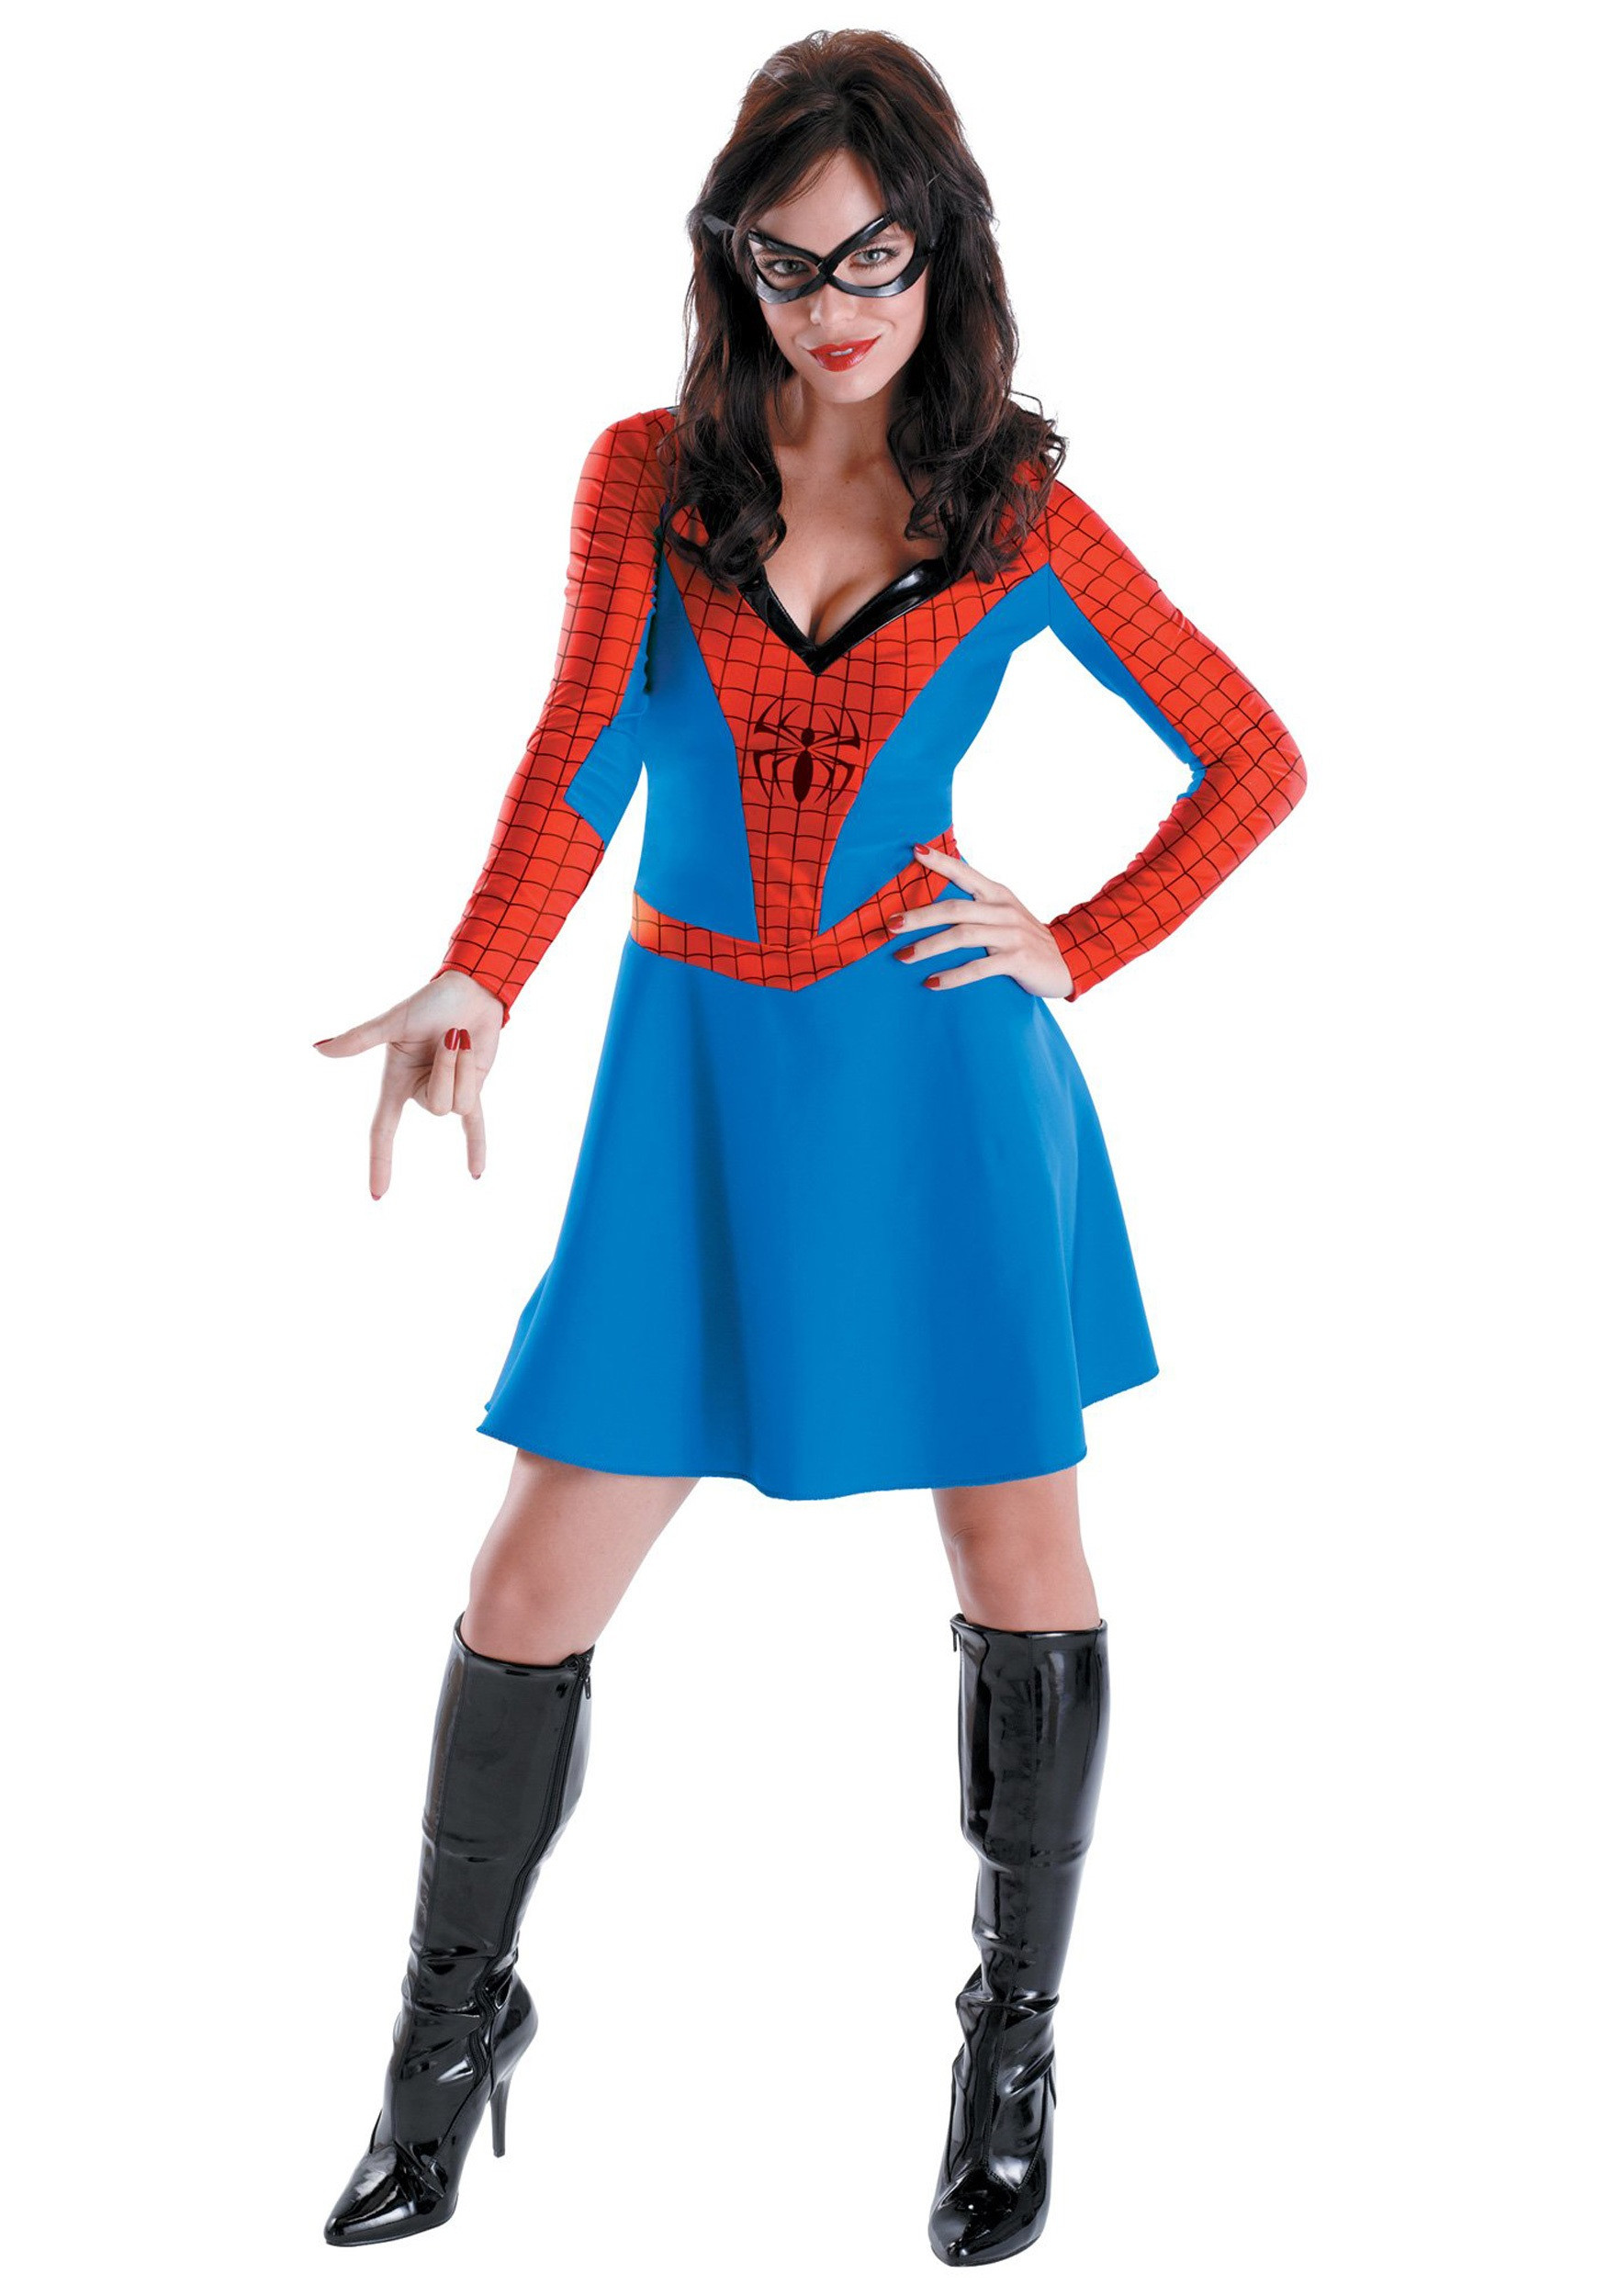 DIY Spider Woman Costume
 cheap halloween costume ideas for women October 2012